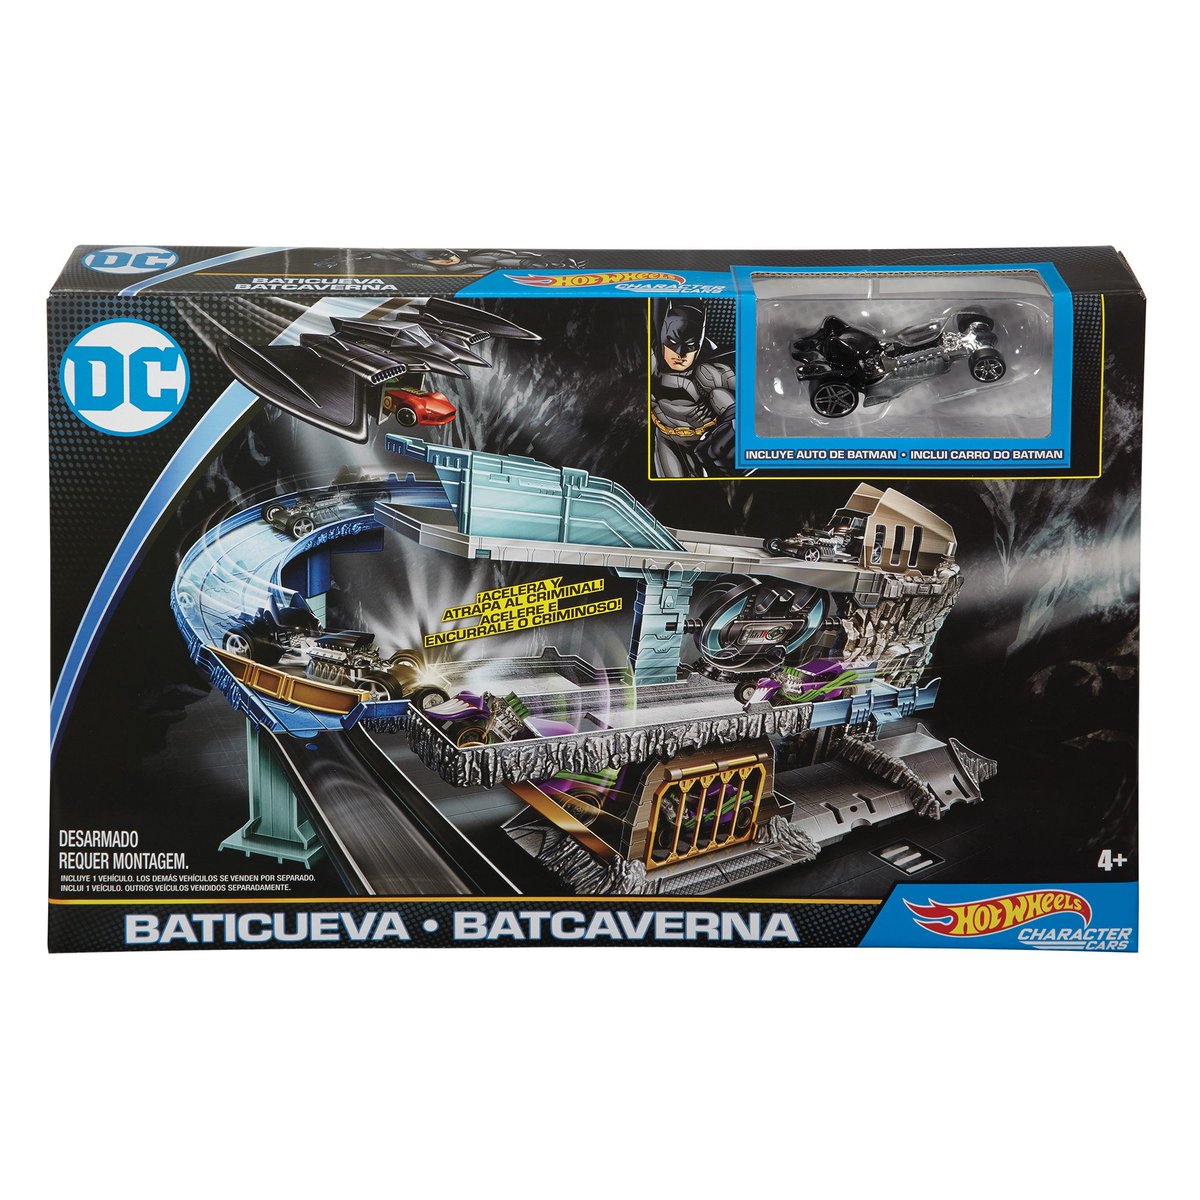 The Hotwheels Batcavebecause....they bought a license